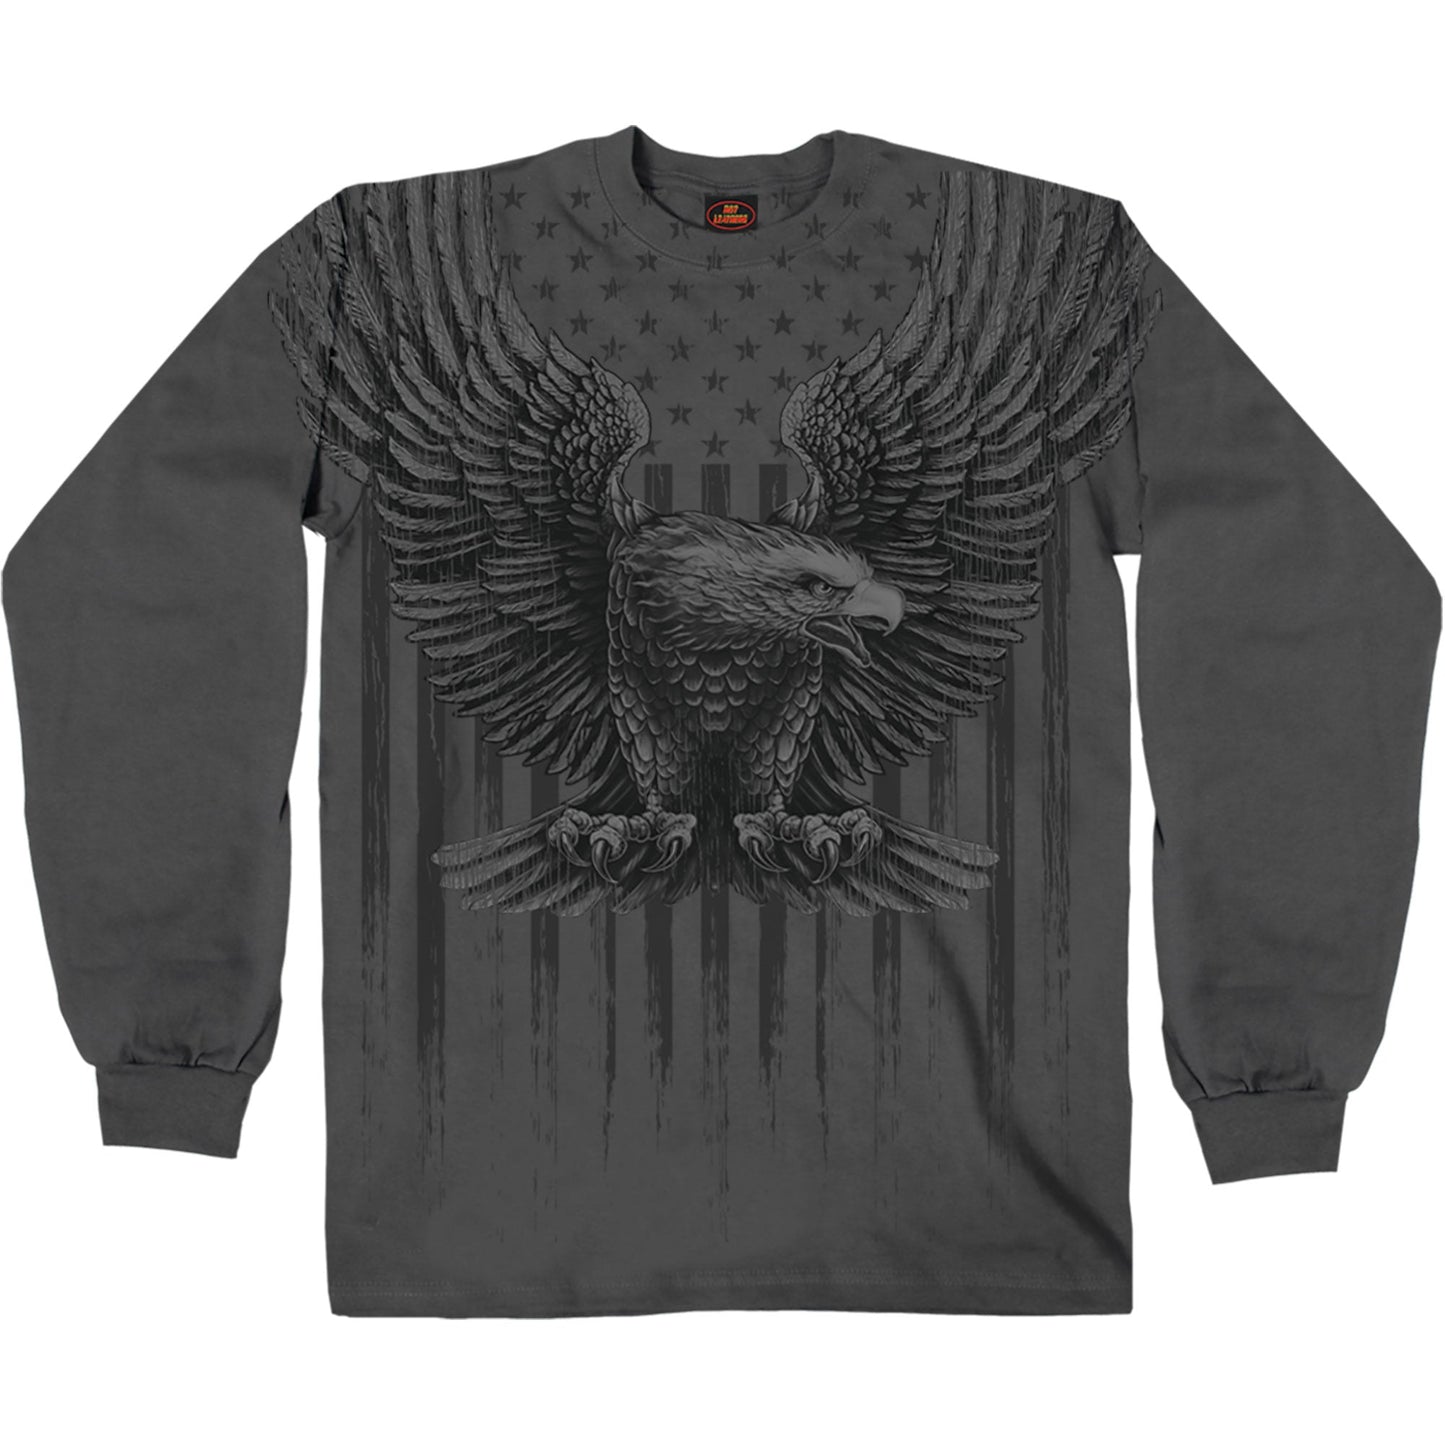 Men's Charcoal Up-Wing Eagle Long Sleeve T-Shirt